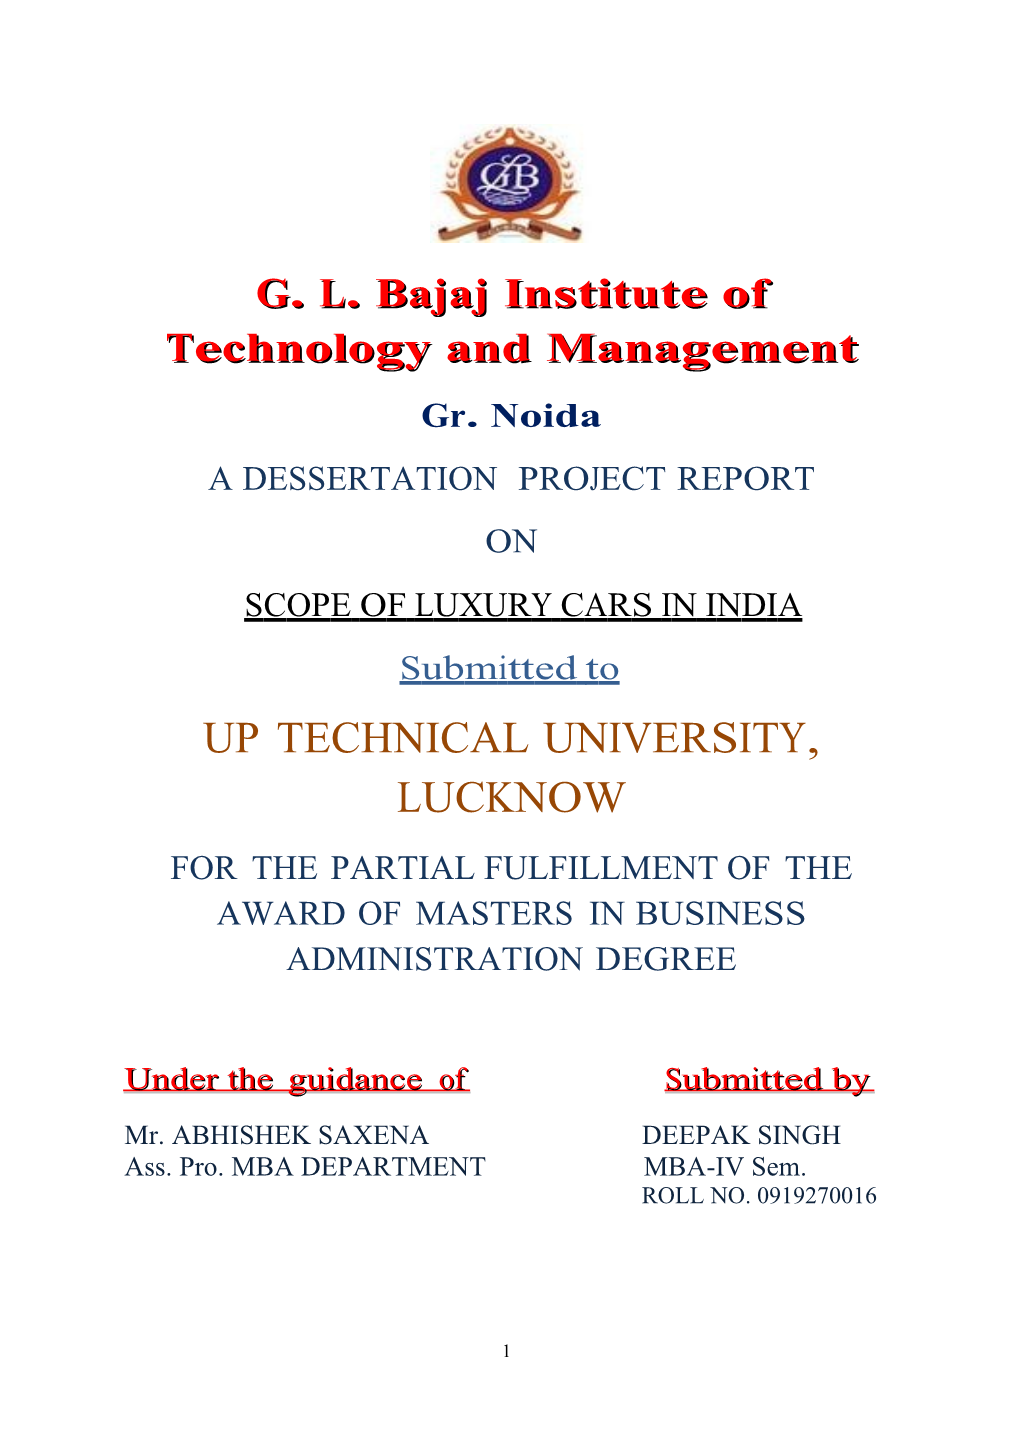 Up Technical University, Lucknow for the Partial Fulfillment of the Award of Masters in Business Administration Degree